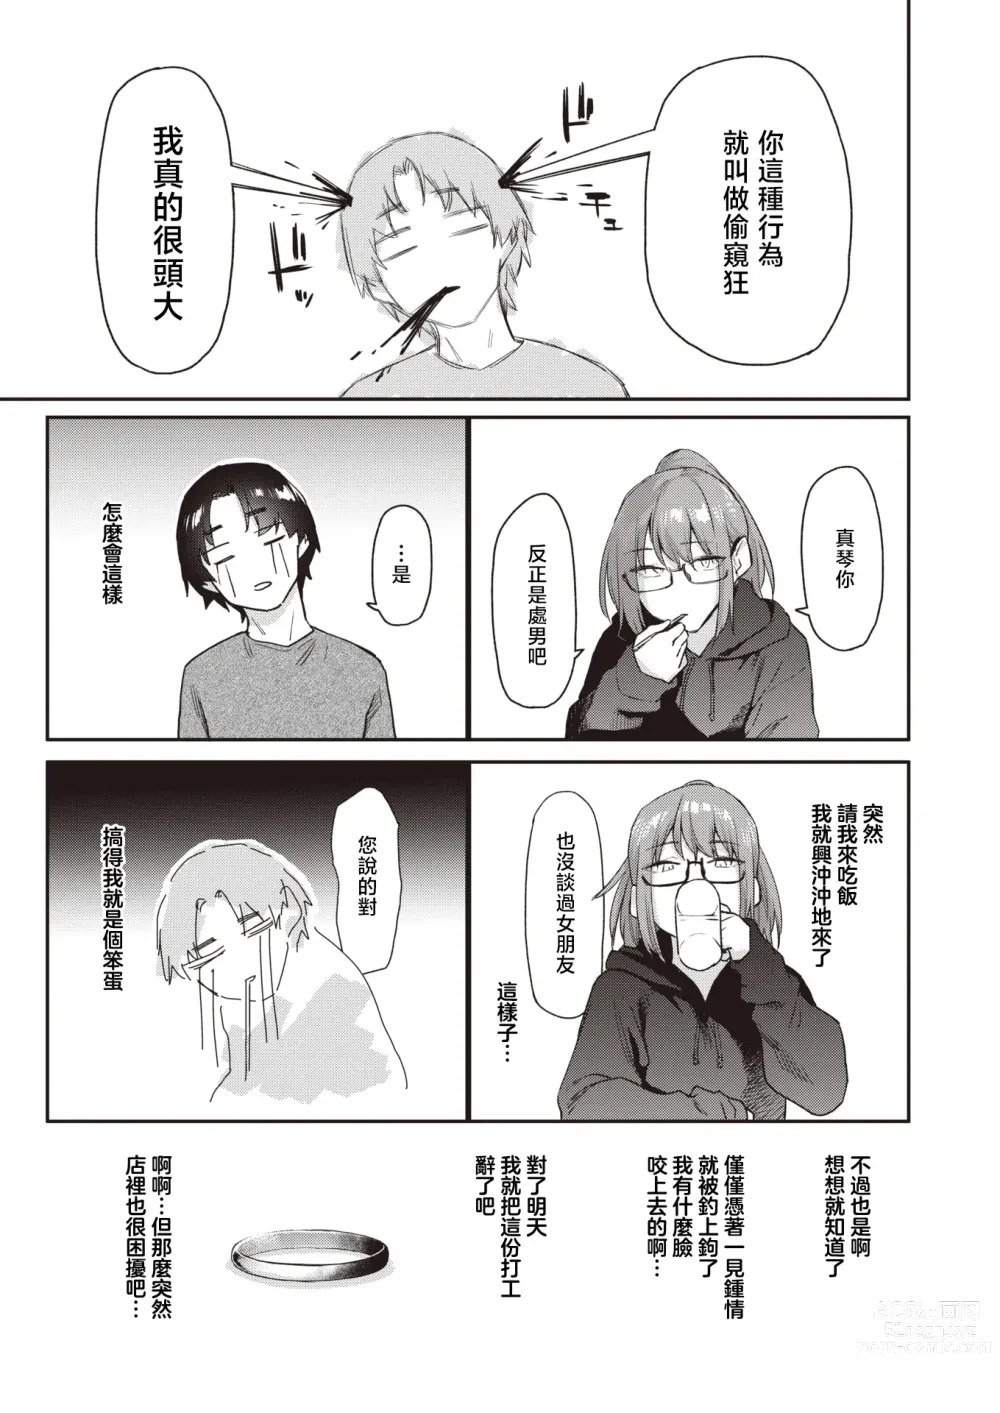 Page 7 of doujinshi 自用